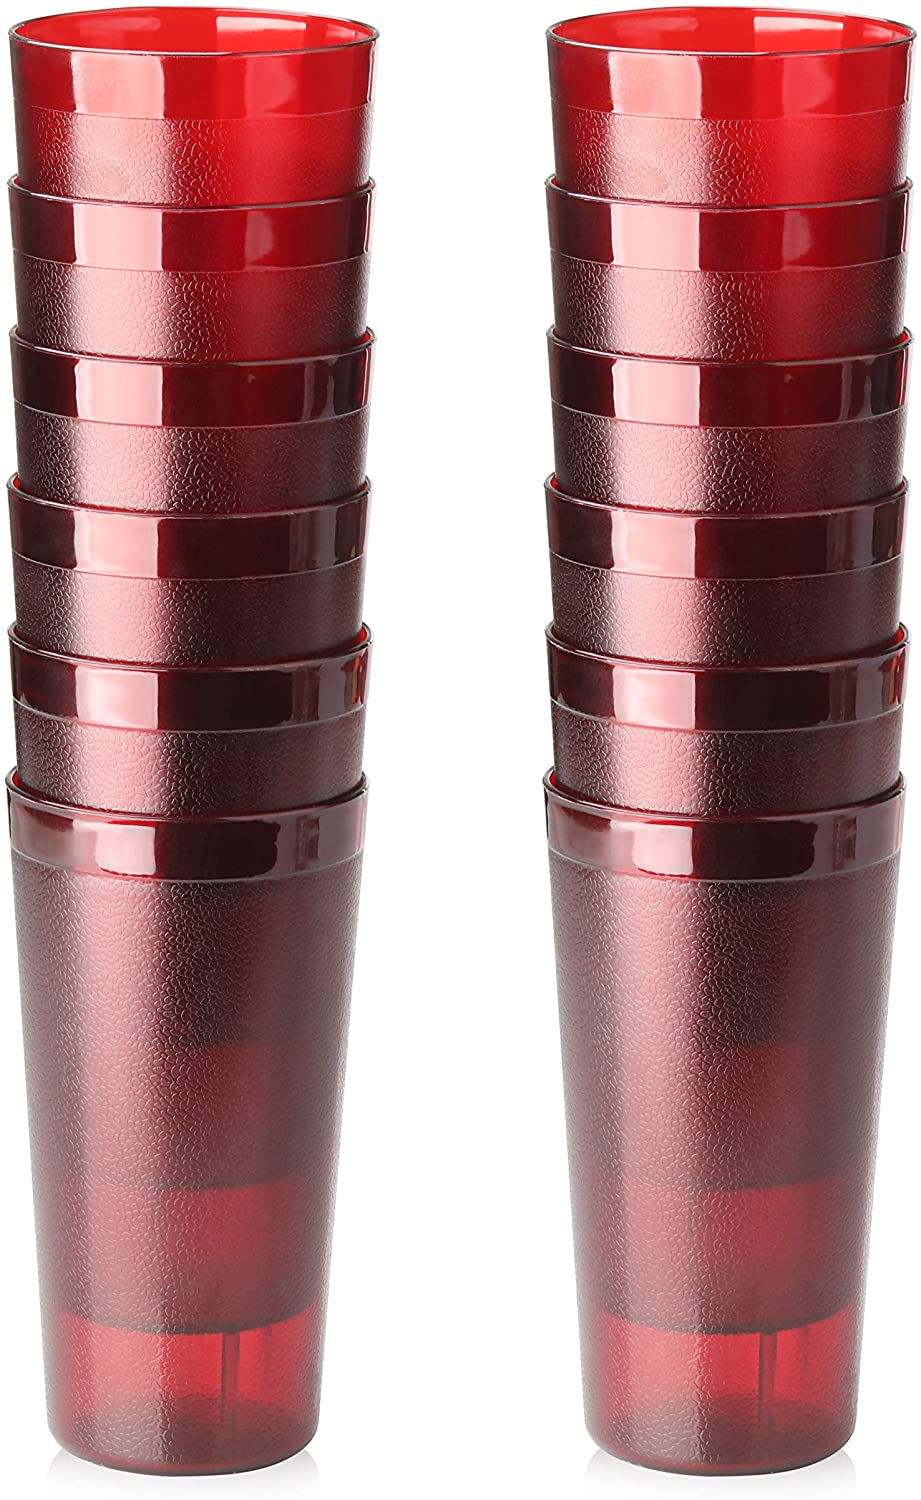 New Star Foodservice 46489 Tumbler Beverage Cups, Restaurant Quality, Plastic, 20 oz, Red, Set of 12